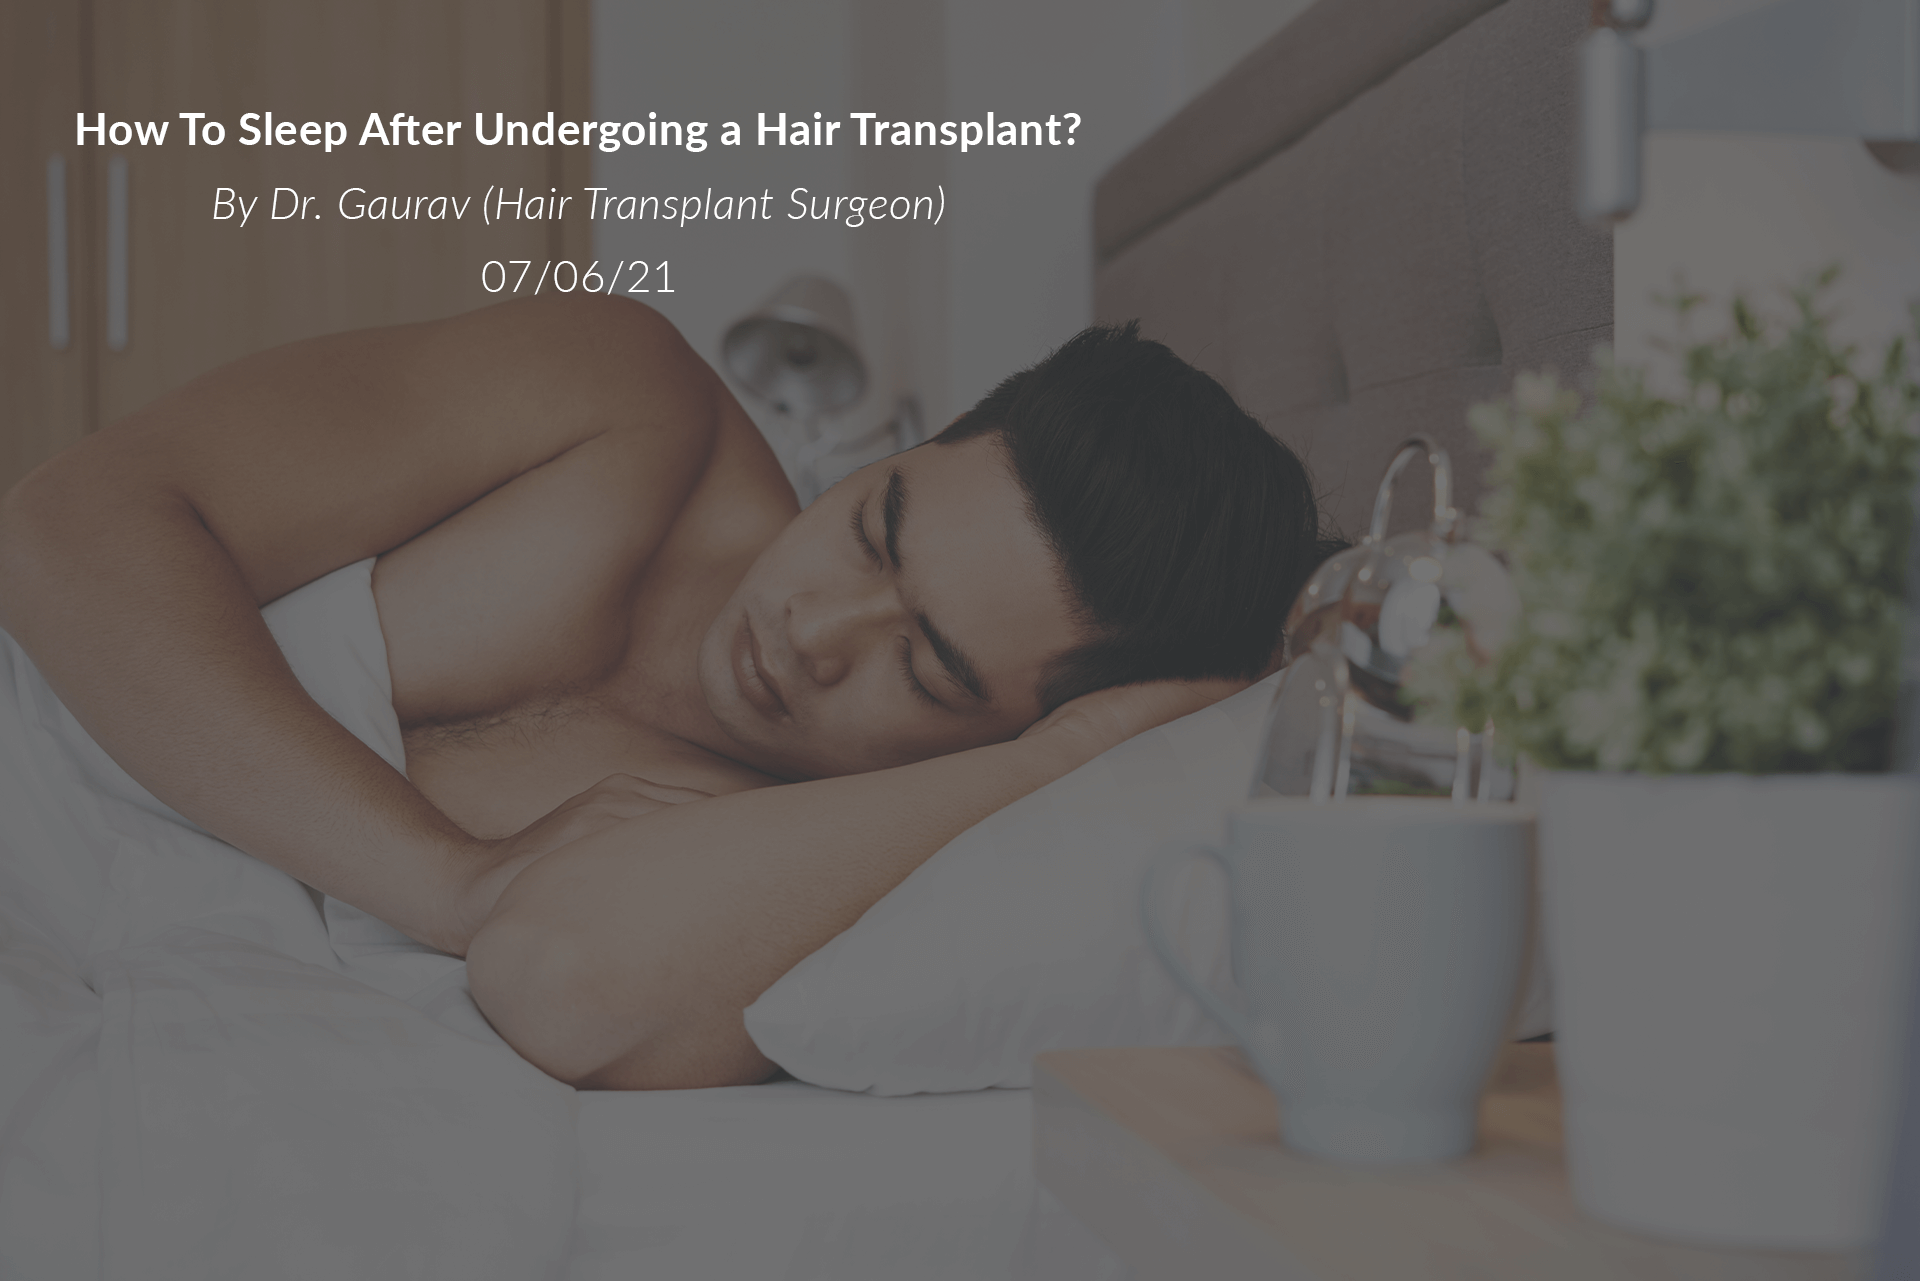 How To Sleep After Undergoing a Hair Transplant?